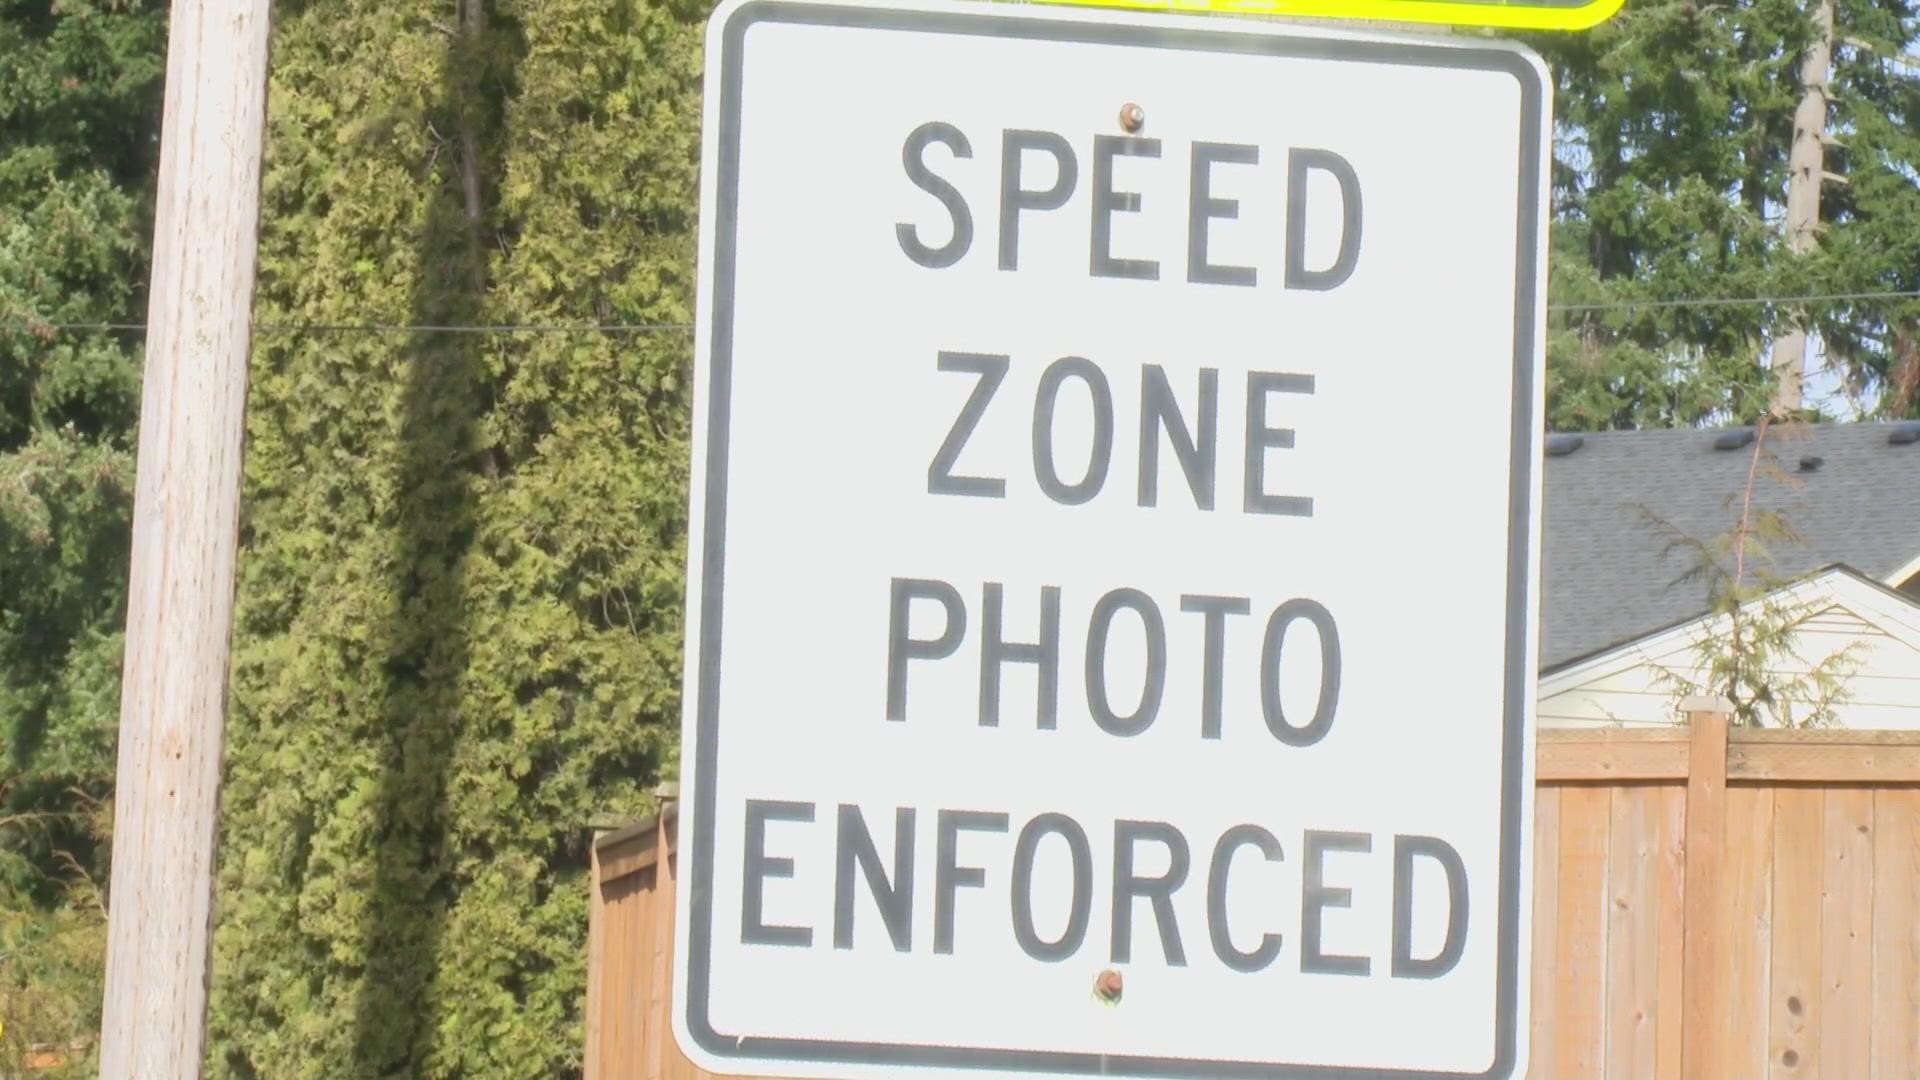 The Lynnwood City Council voted on Wednesday in favor of an ordinance that would increase fees for photo-enforced driving violations.